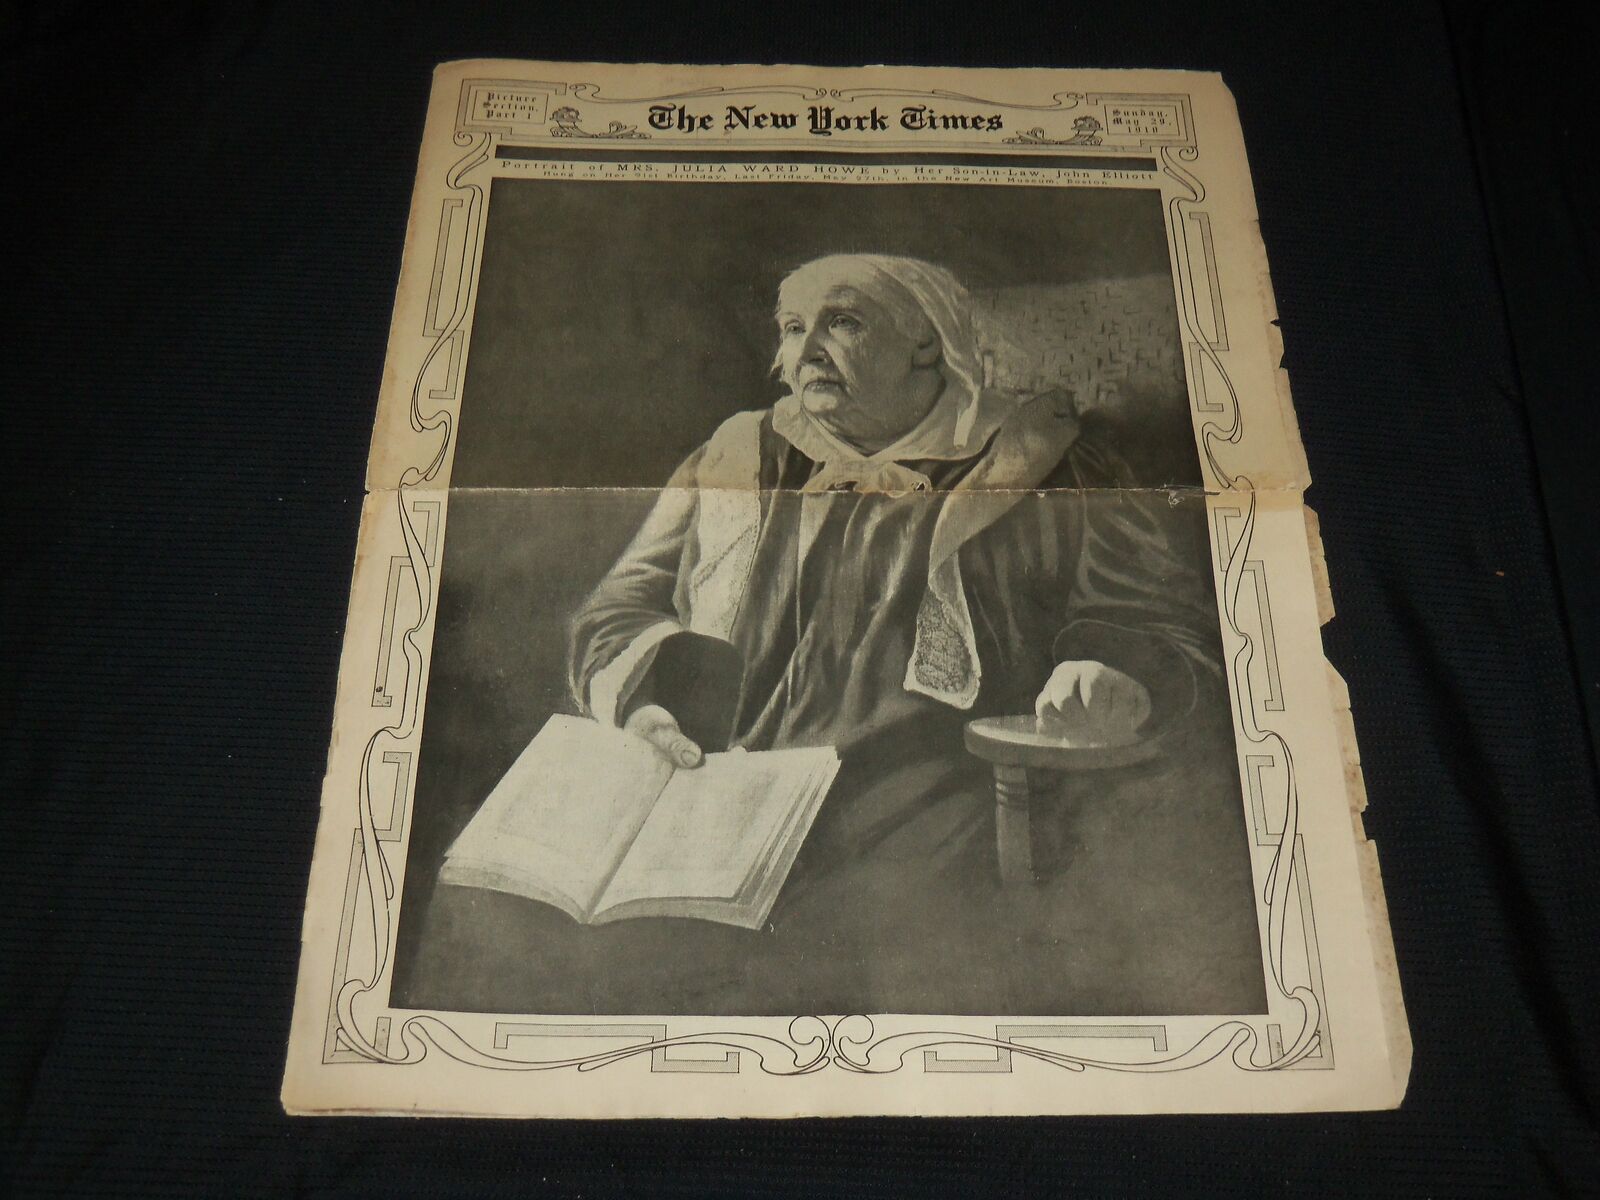 1910 MAY 29 NEW YORK TIMES PICTURE SECTION - JULIA WARD HOWE - NP 5645